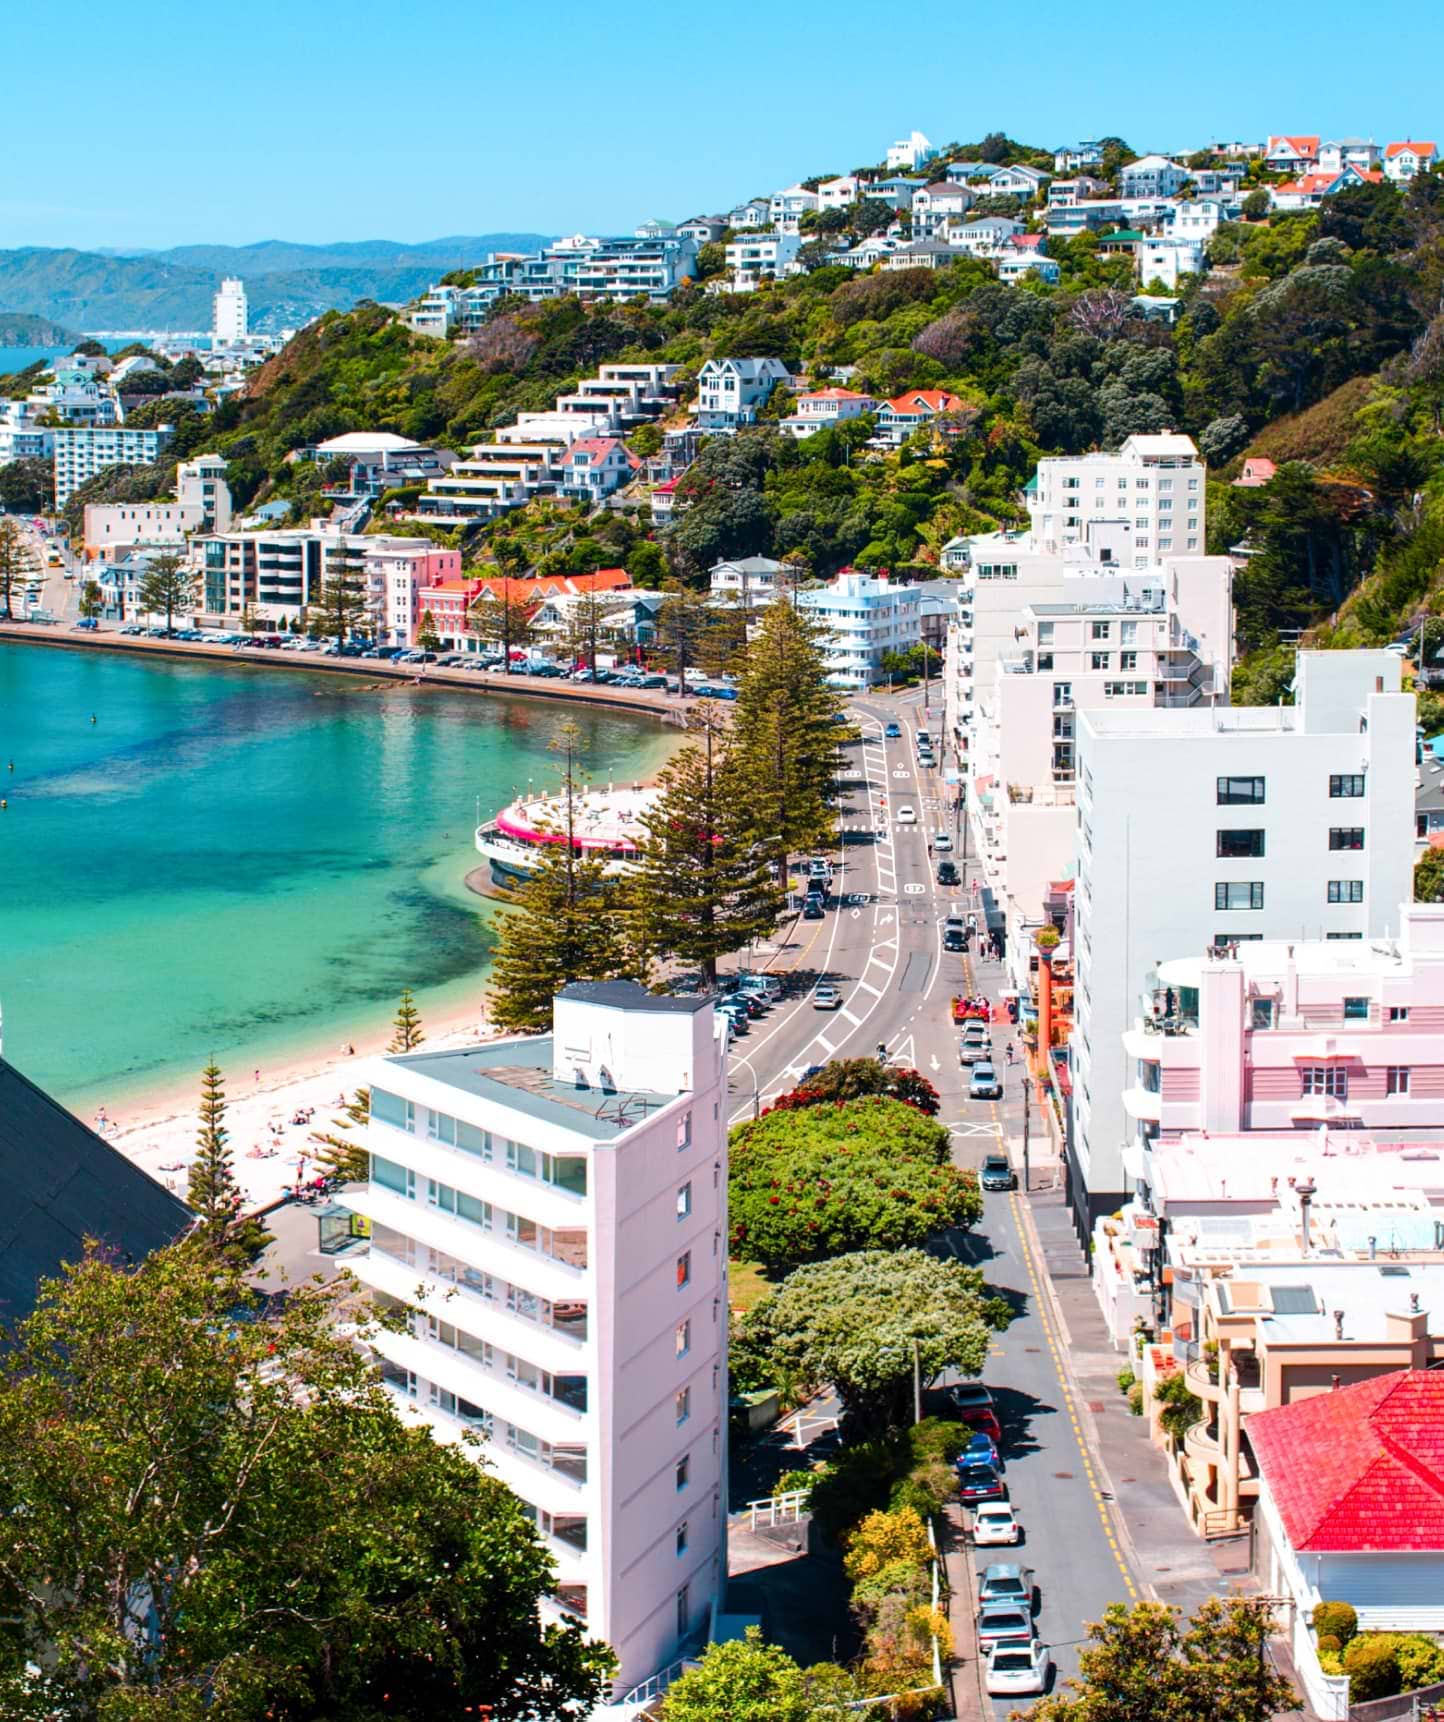 Pacific Fjords and Tasman Treasures - City by the beach with houses on the hills